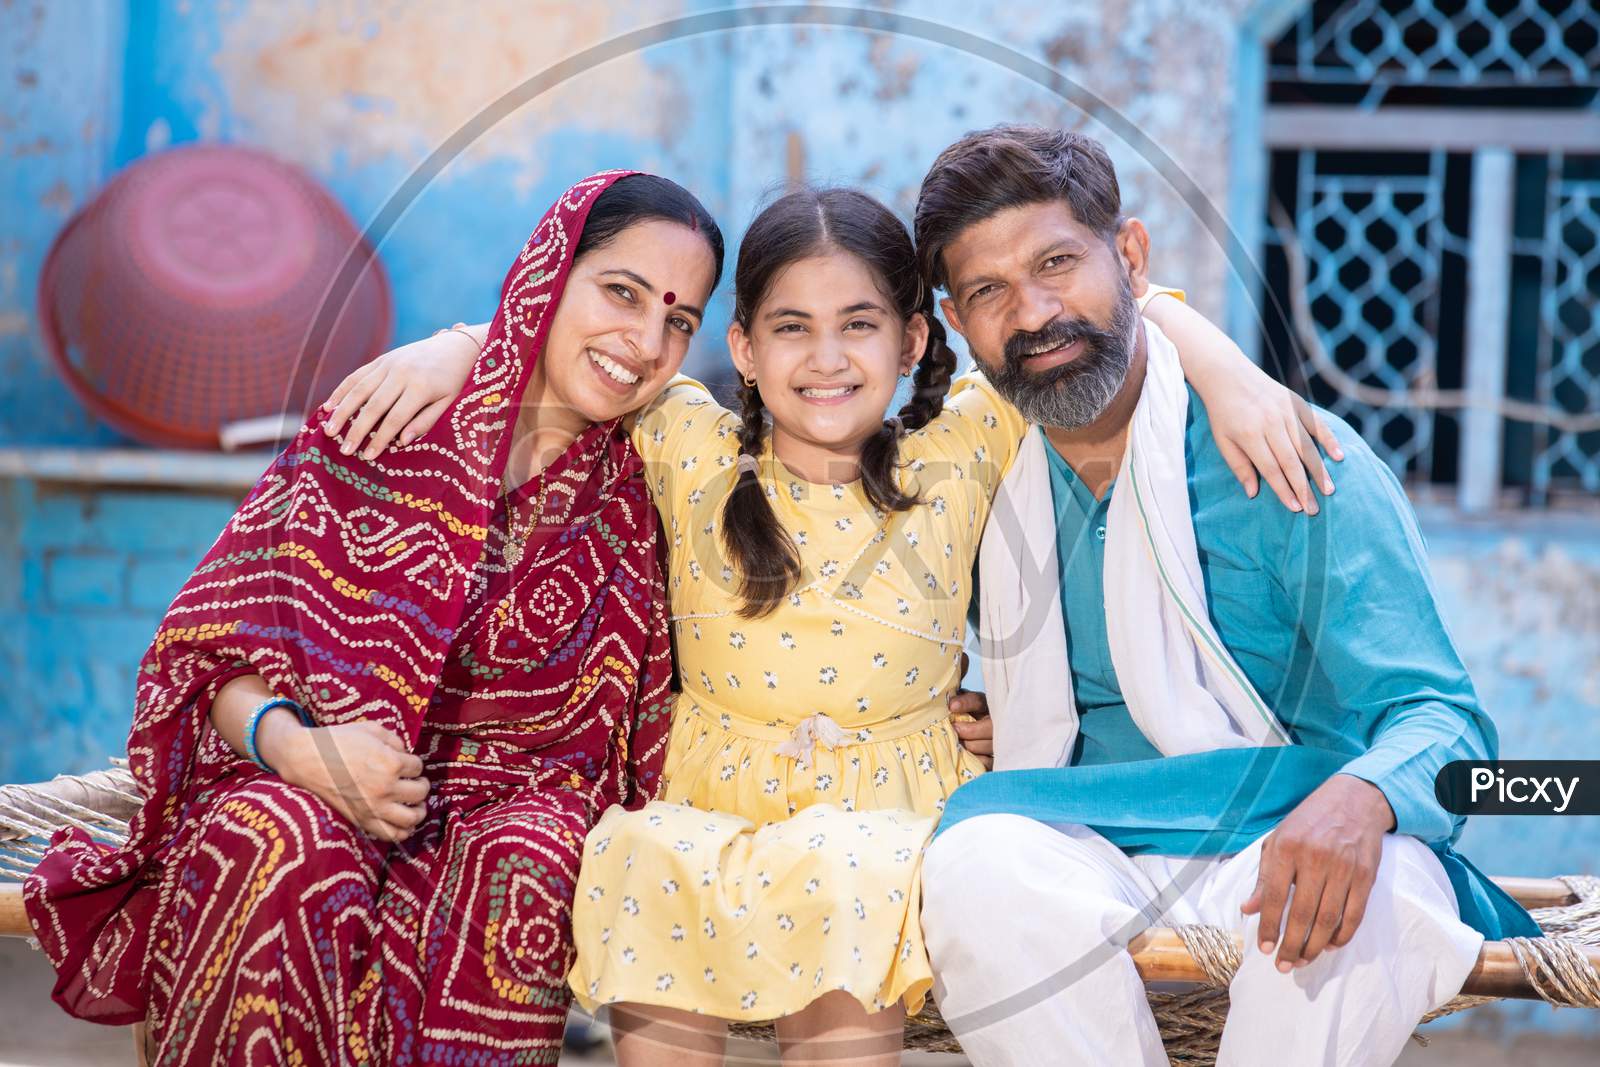 Portrait Of Happy Rural Indian Family In Looking At Camera While Sitting On Traditional Bed At Village Home, Cute Adorable Little Daughter Hug Her Father And Mother. India Parent With Child Smiling